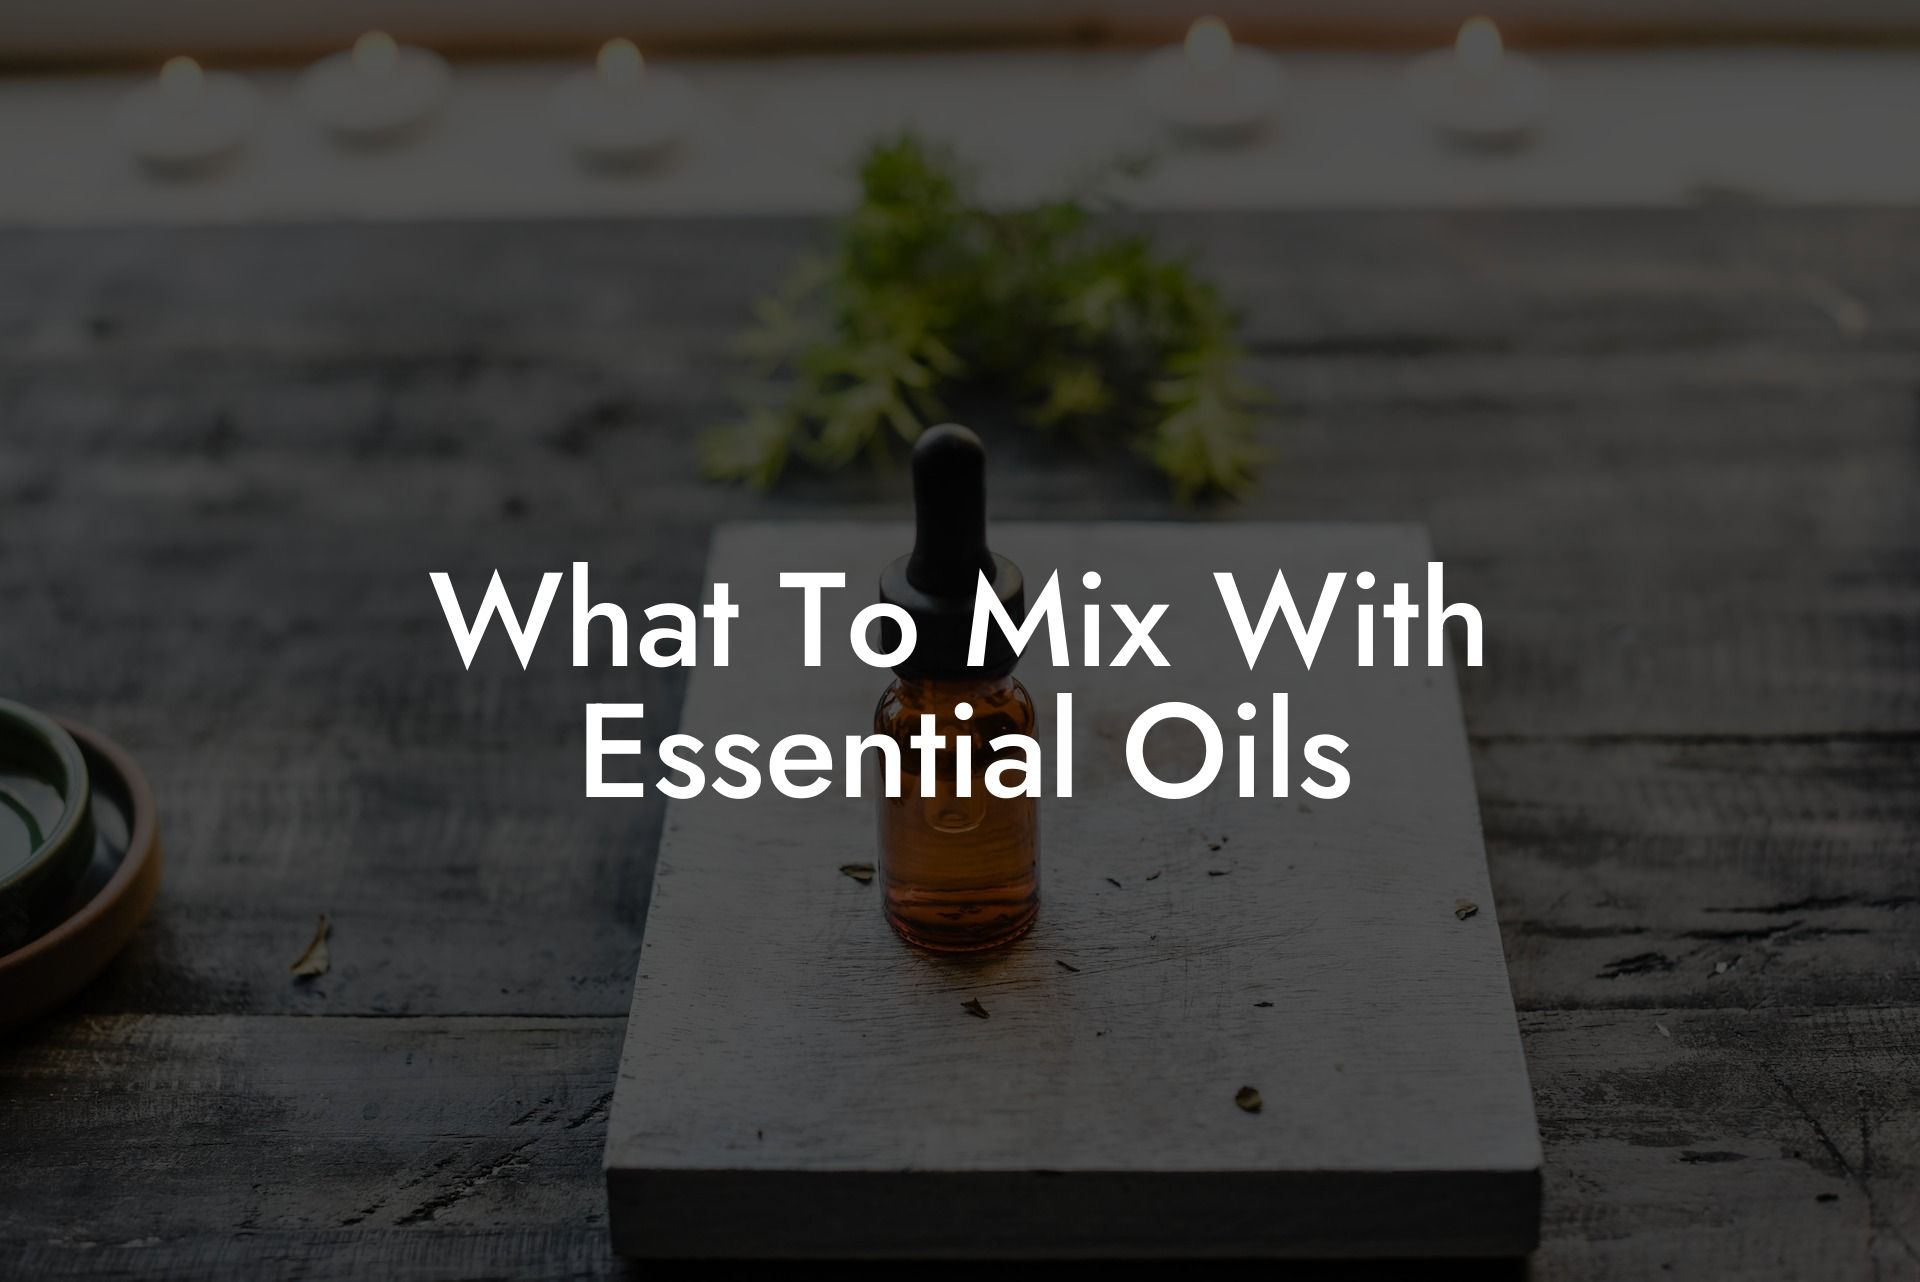 What To Mix With Essential Oils